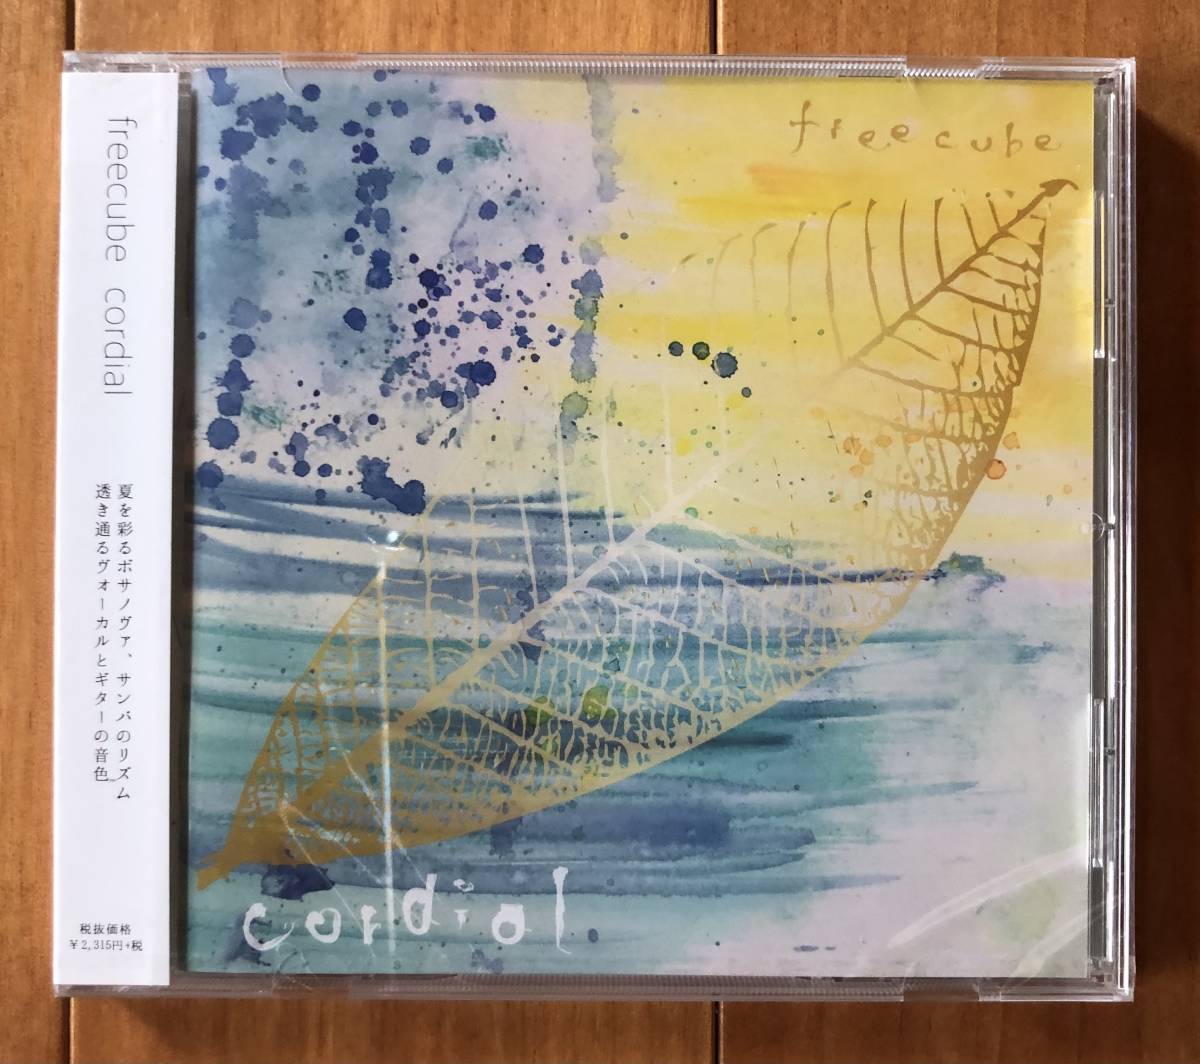 CD-July / disk Union_DIW Products / Playright / freecube cordial : freecube are エミコ　and c.j.